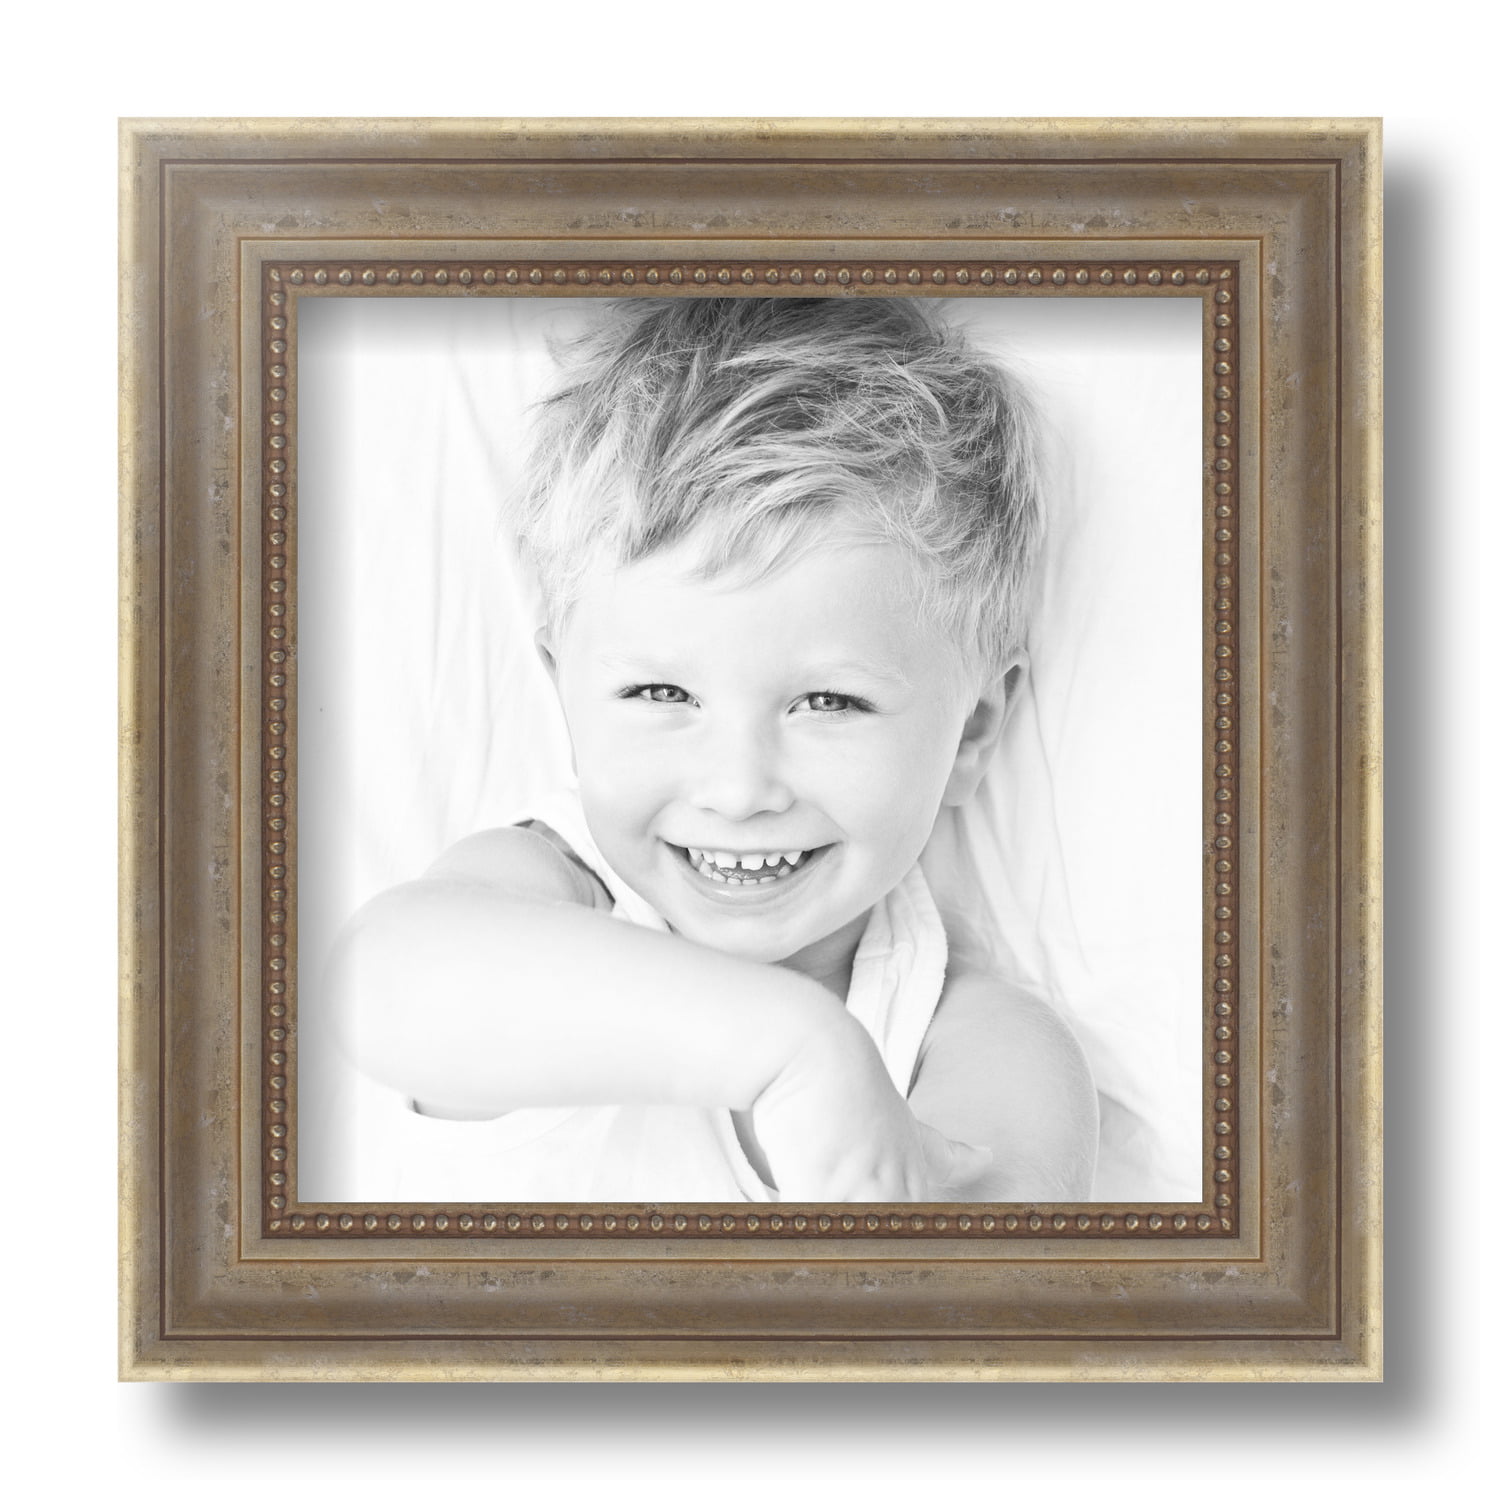 ArtToFrames 16x24 Inch Black Velvet with Silver Picture Frame